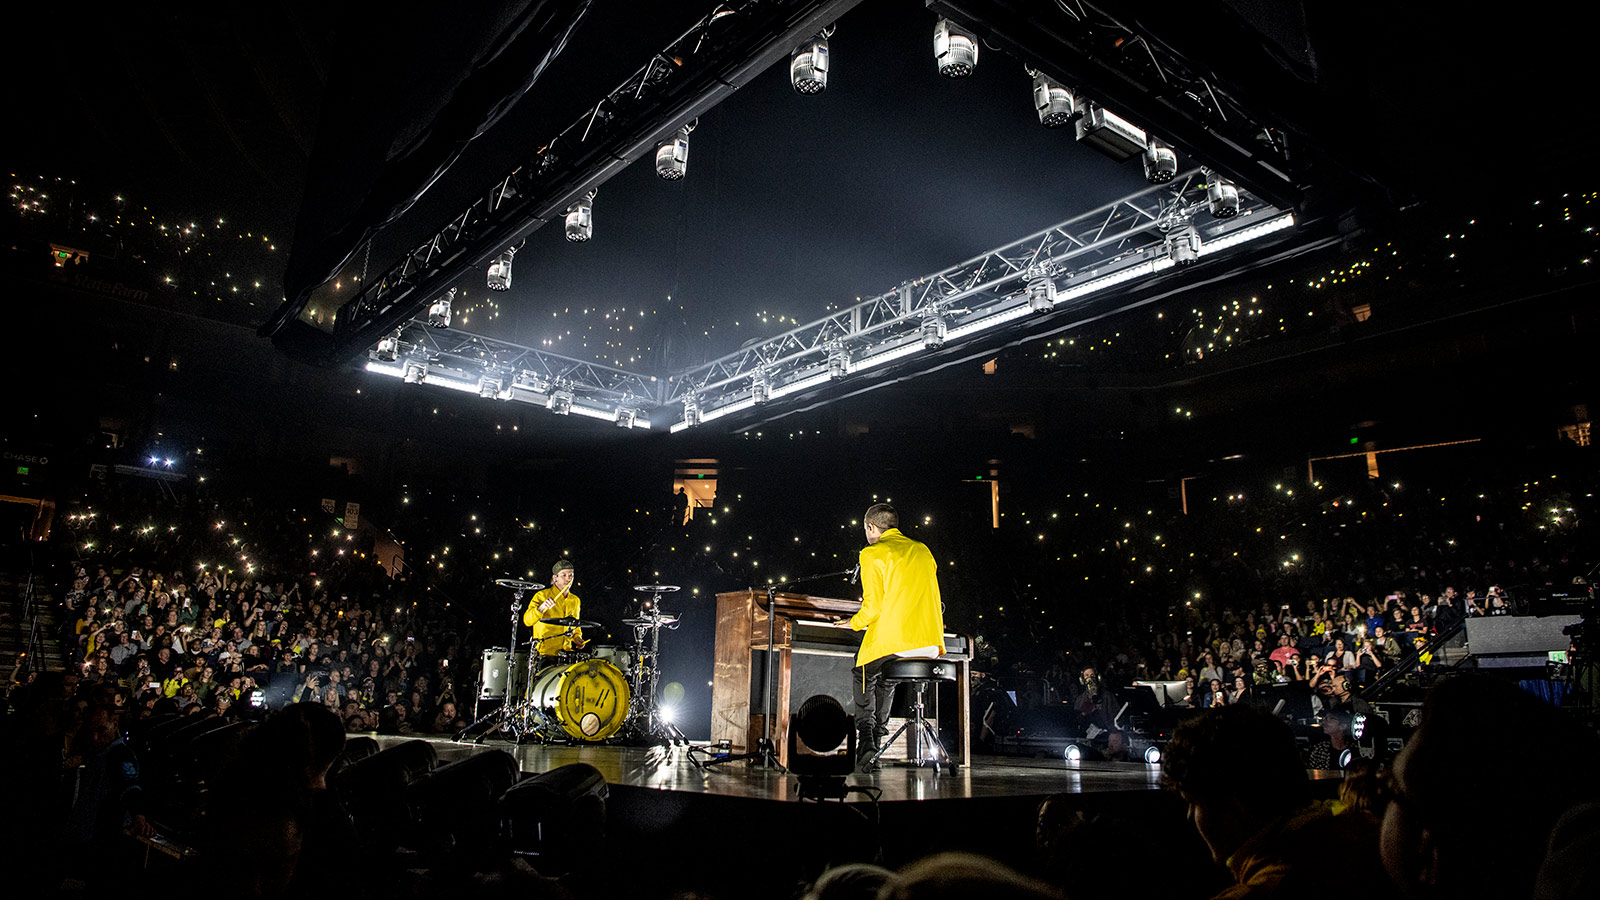 The Bandito Tour A Twenty One Pilots experience The Chimes